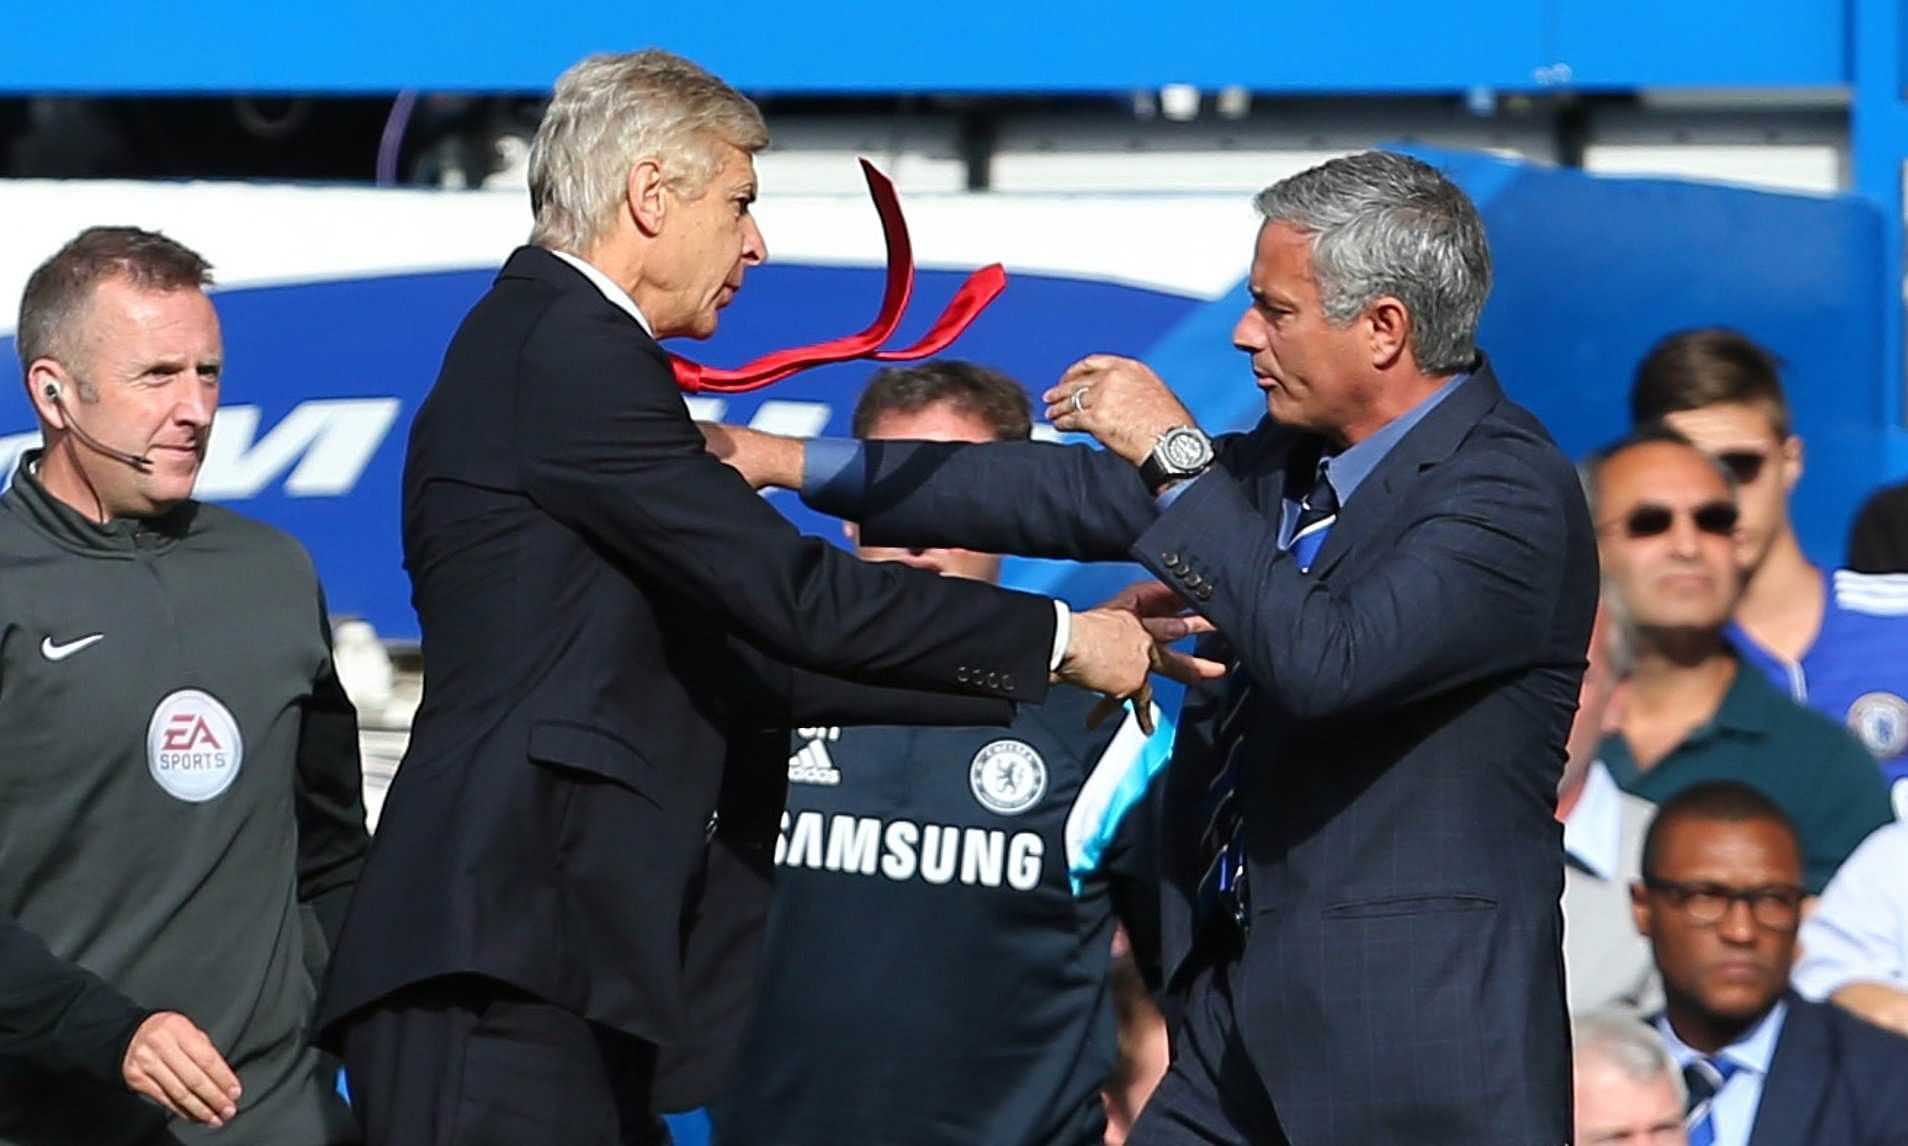 Arsene Wenger (left) and Jose Mourinho created quite a spectacle as they were involved in a sensational touchline push-and-shove in 2014.